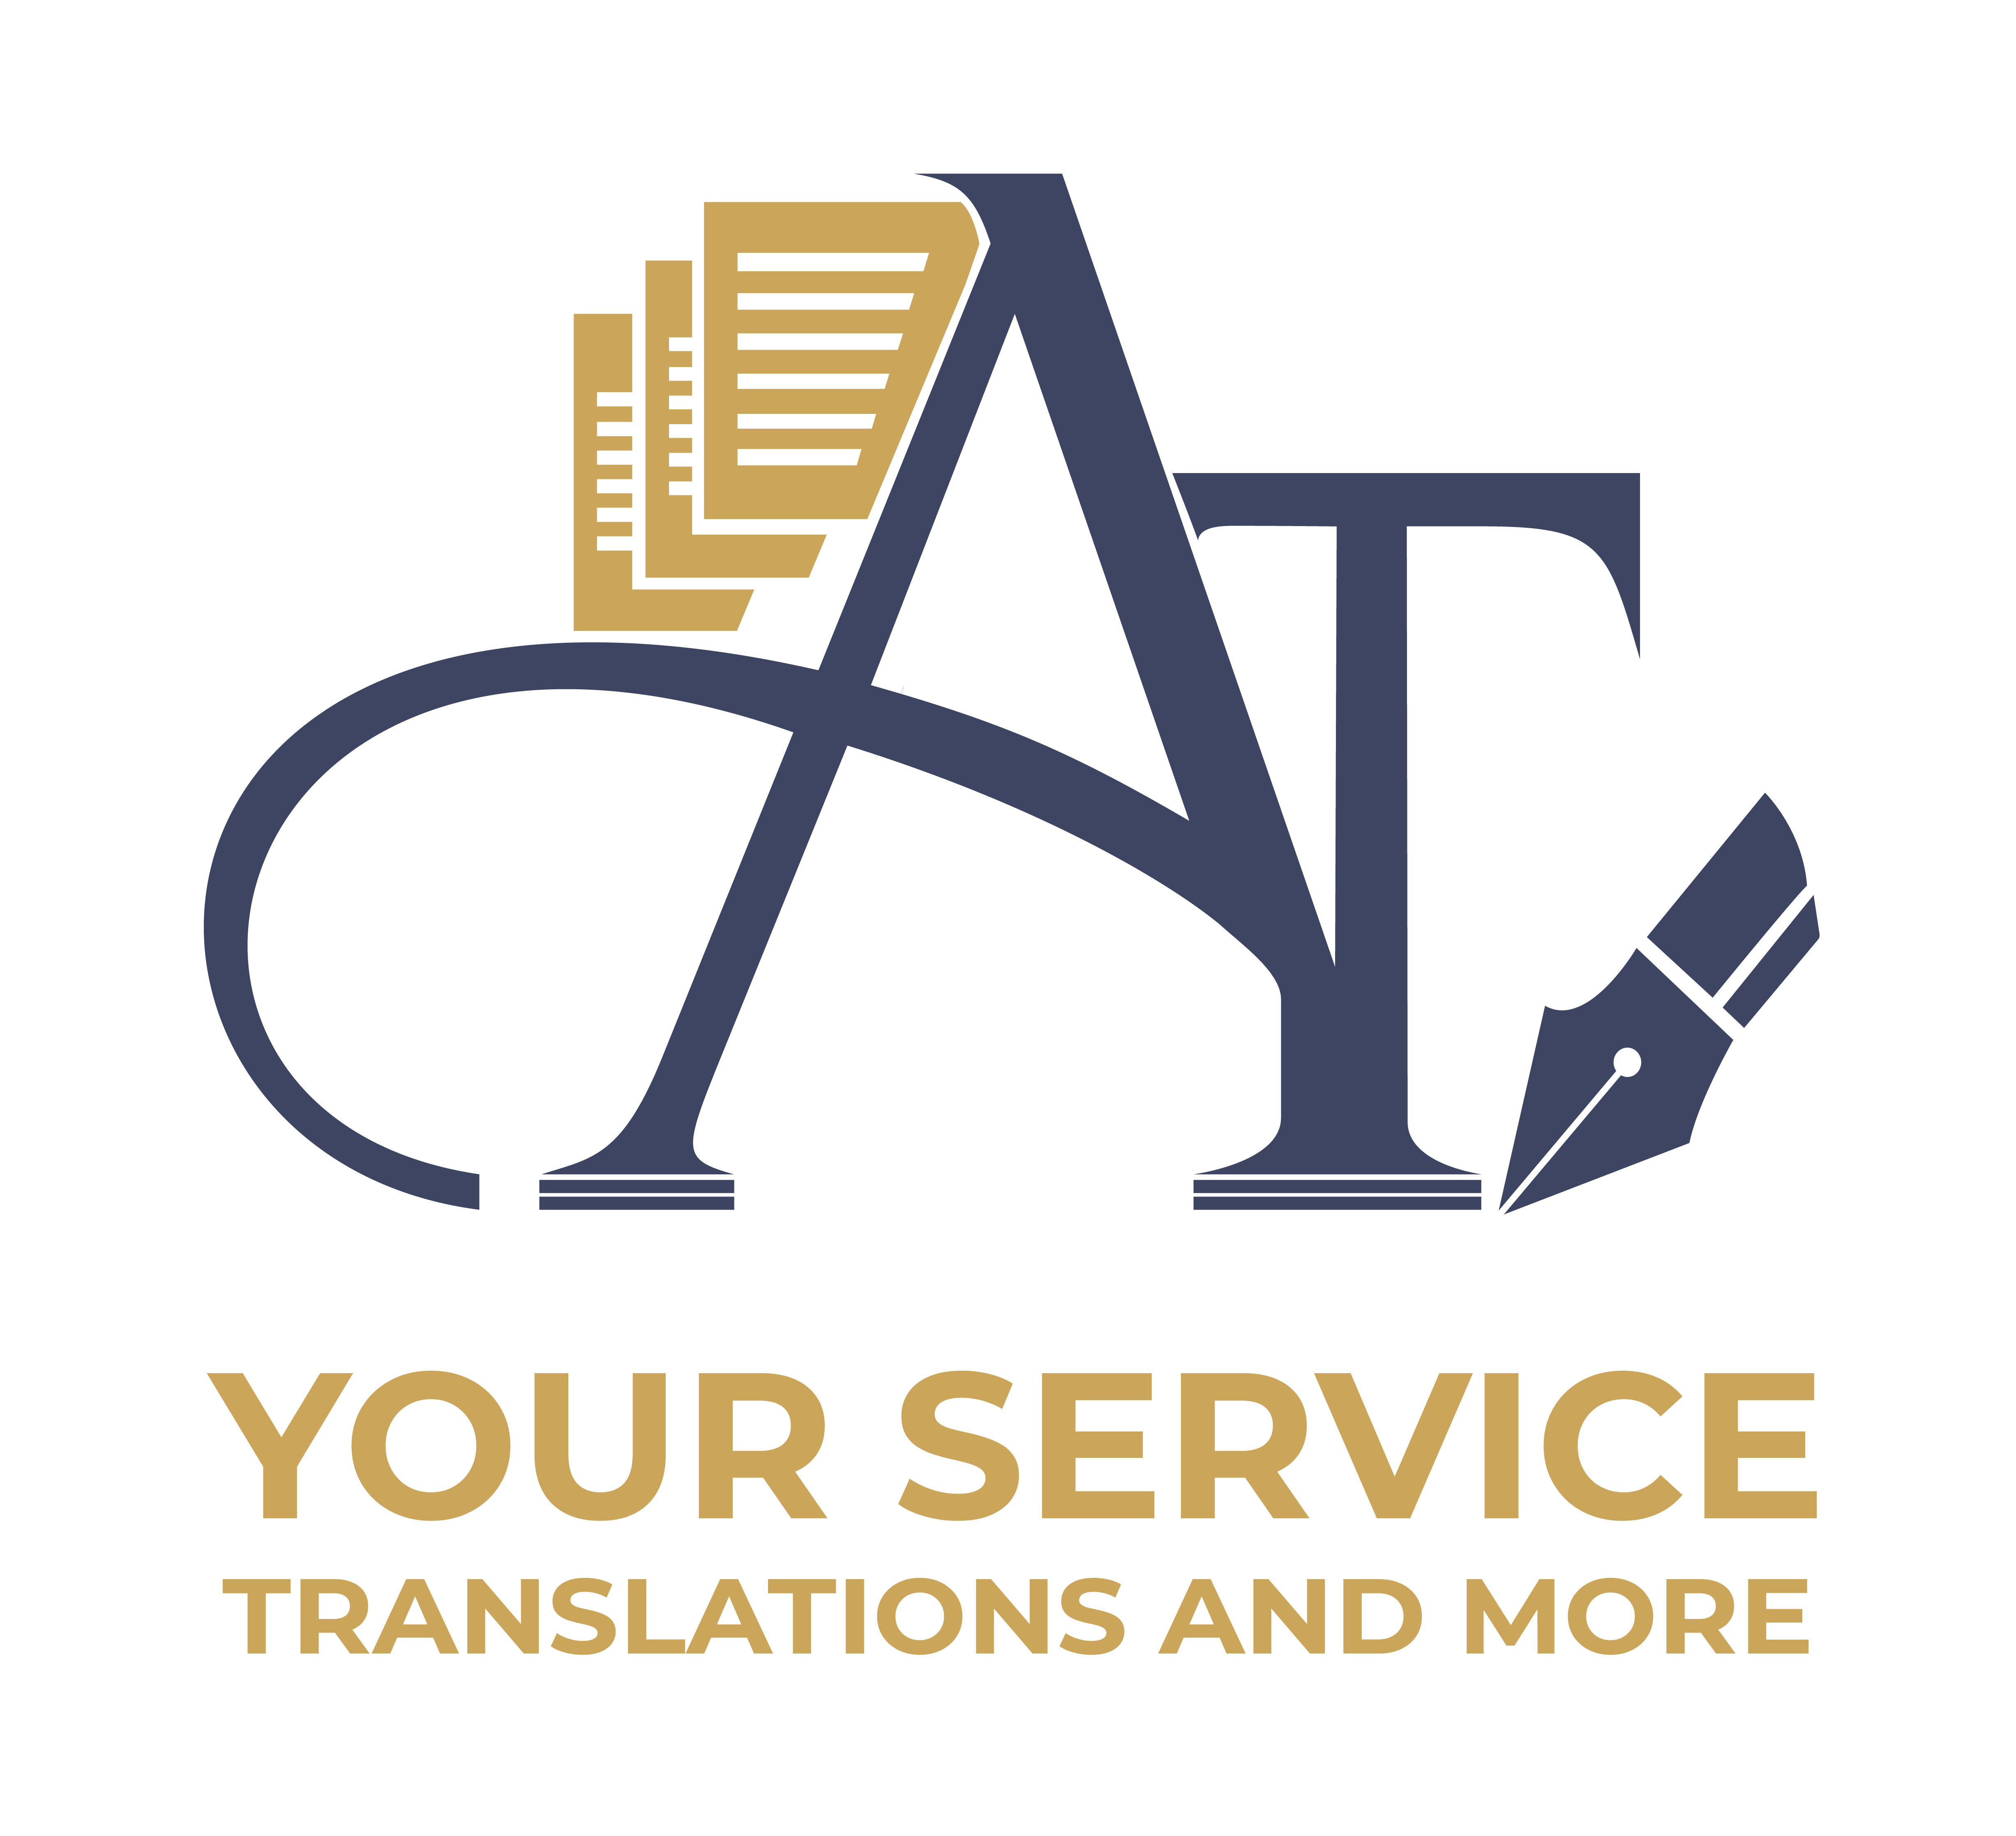 at your service translations and more - logo